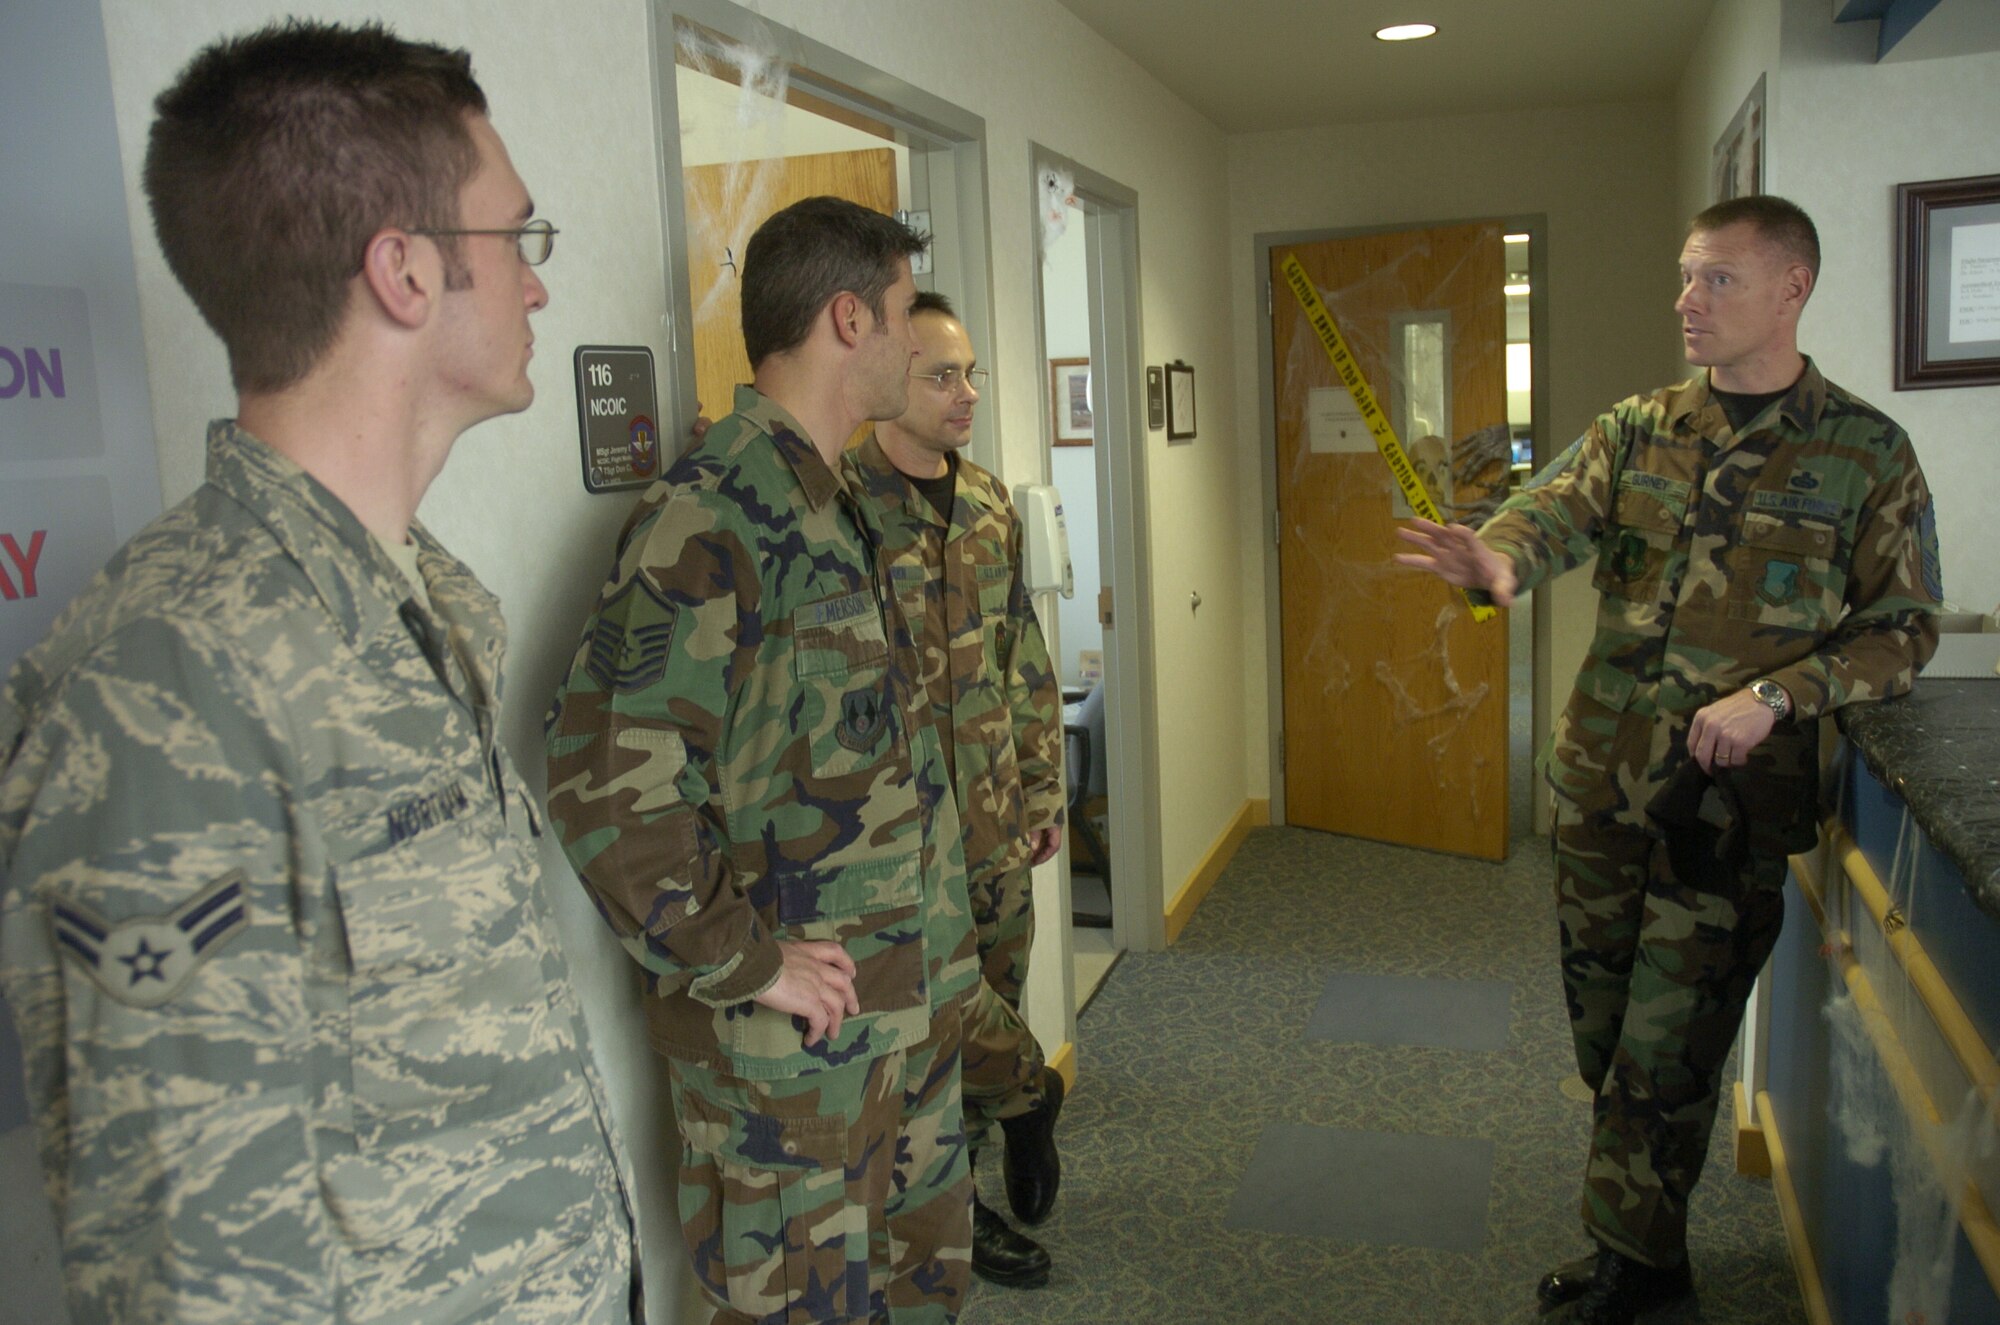 Chief Master Sgt. William Gurney, Ogden Air Logistics Center and 75th Air Base Wing command chief, spends time to visit and speak with Airmen from the 75th Aerospace Medicine Squadron.